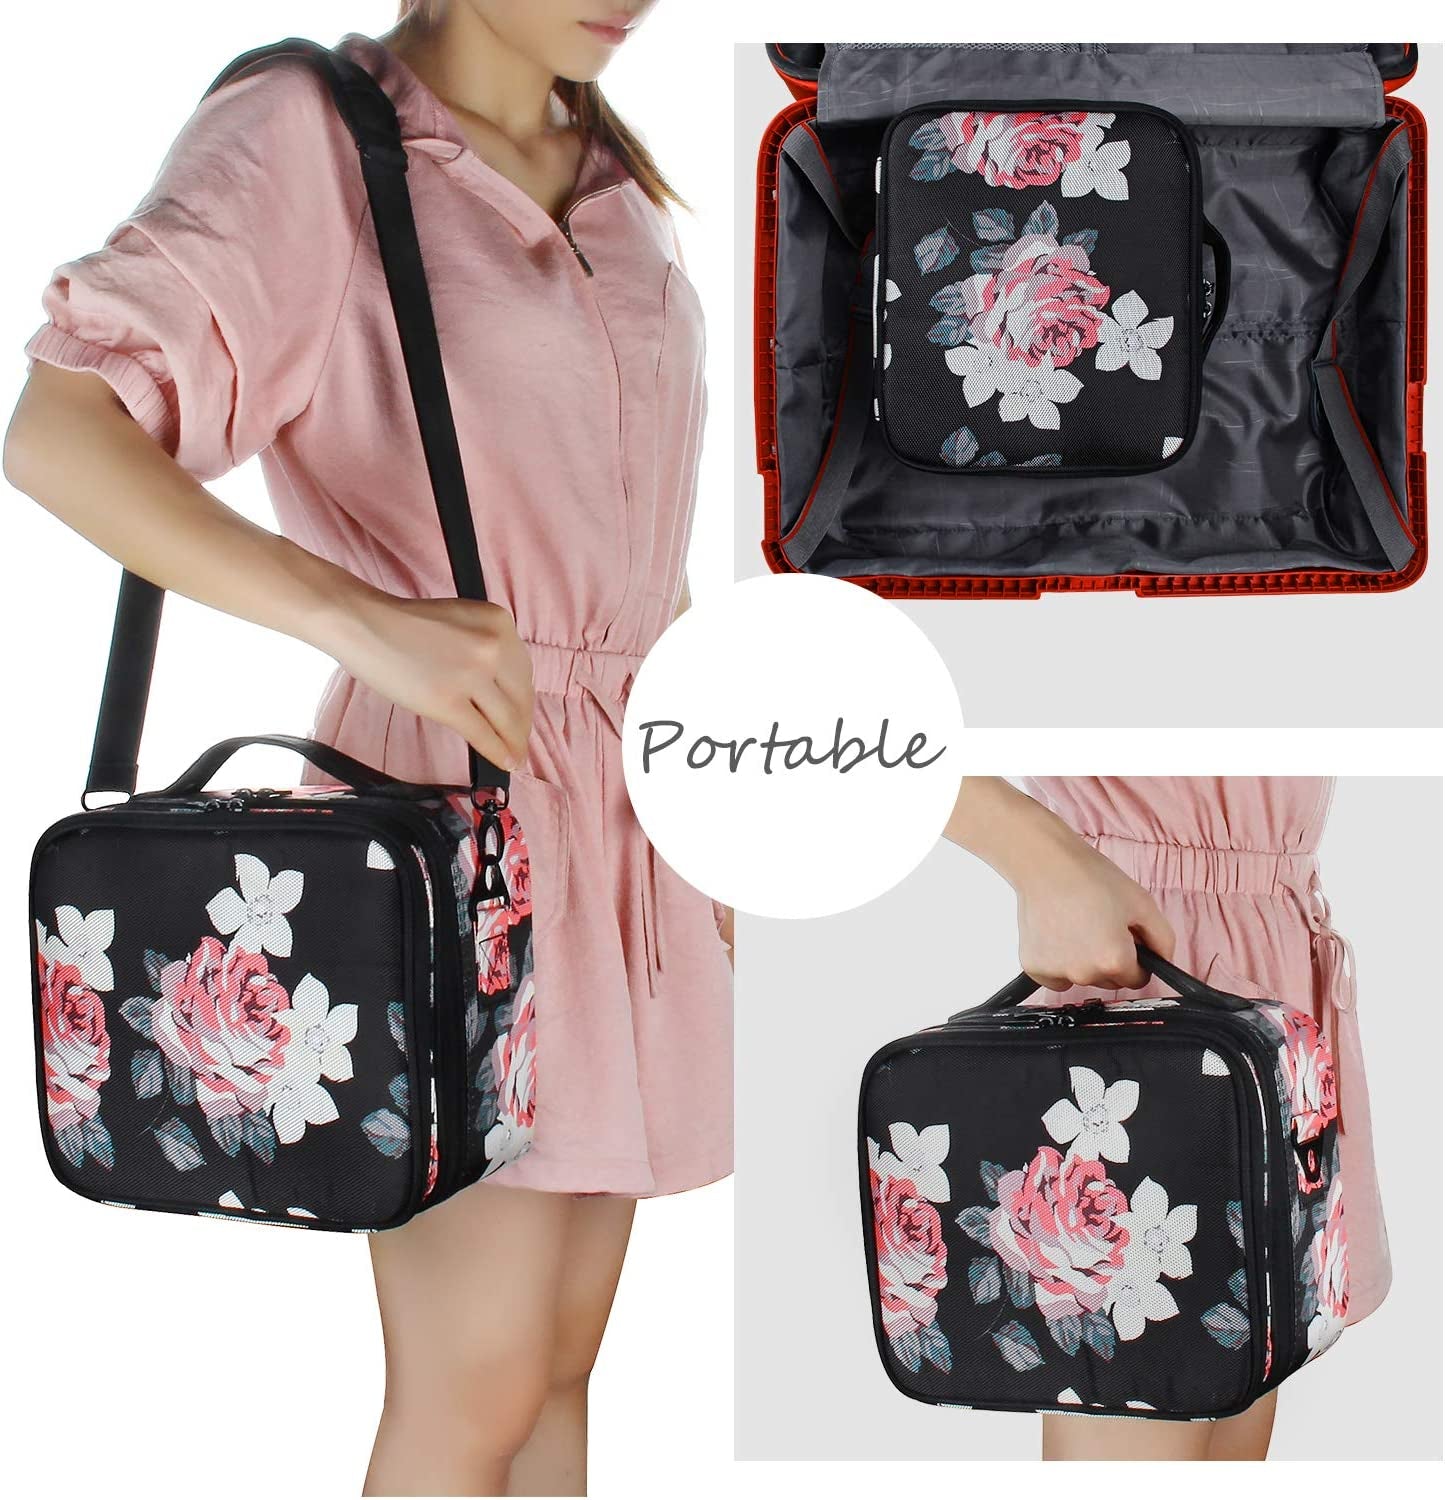 Relavel Travel Makeup Bag 2 Layer Heighten Makeup Train Case Cosmetic Storage and Organizer Box Portable Makeup Carrying Case with Shoulder Strap and Adjustable Dividers (Peony Pattern)